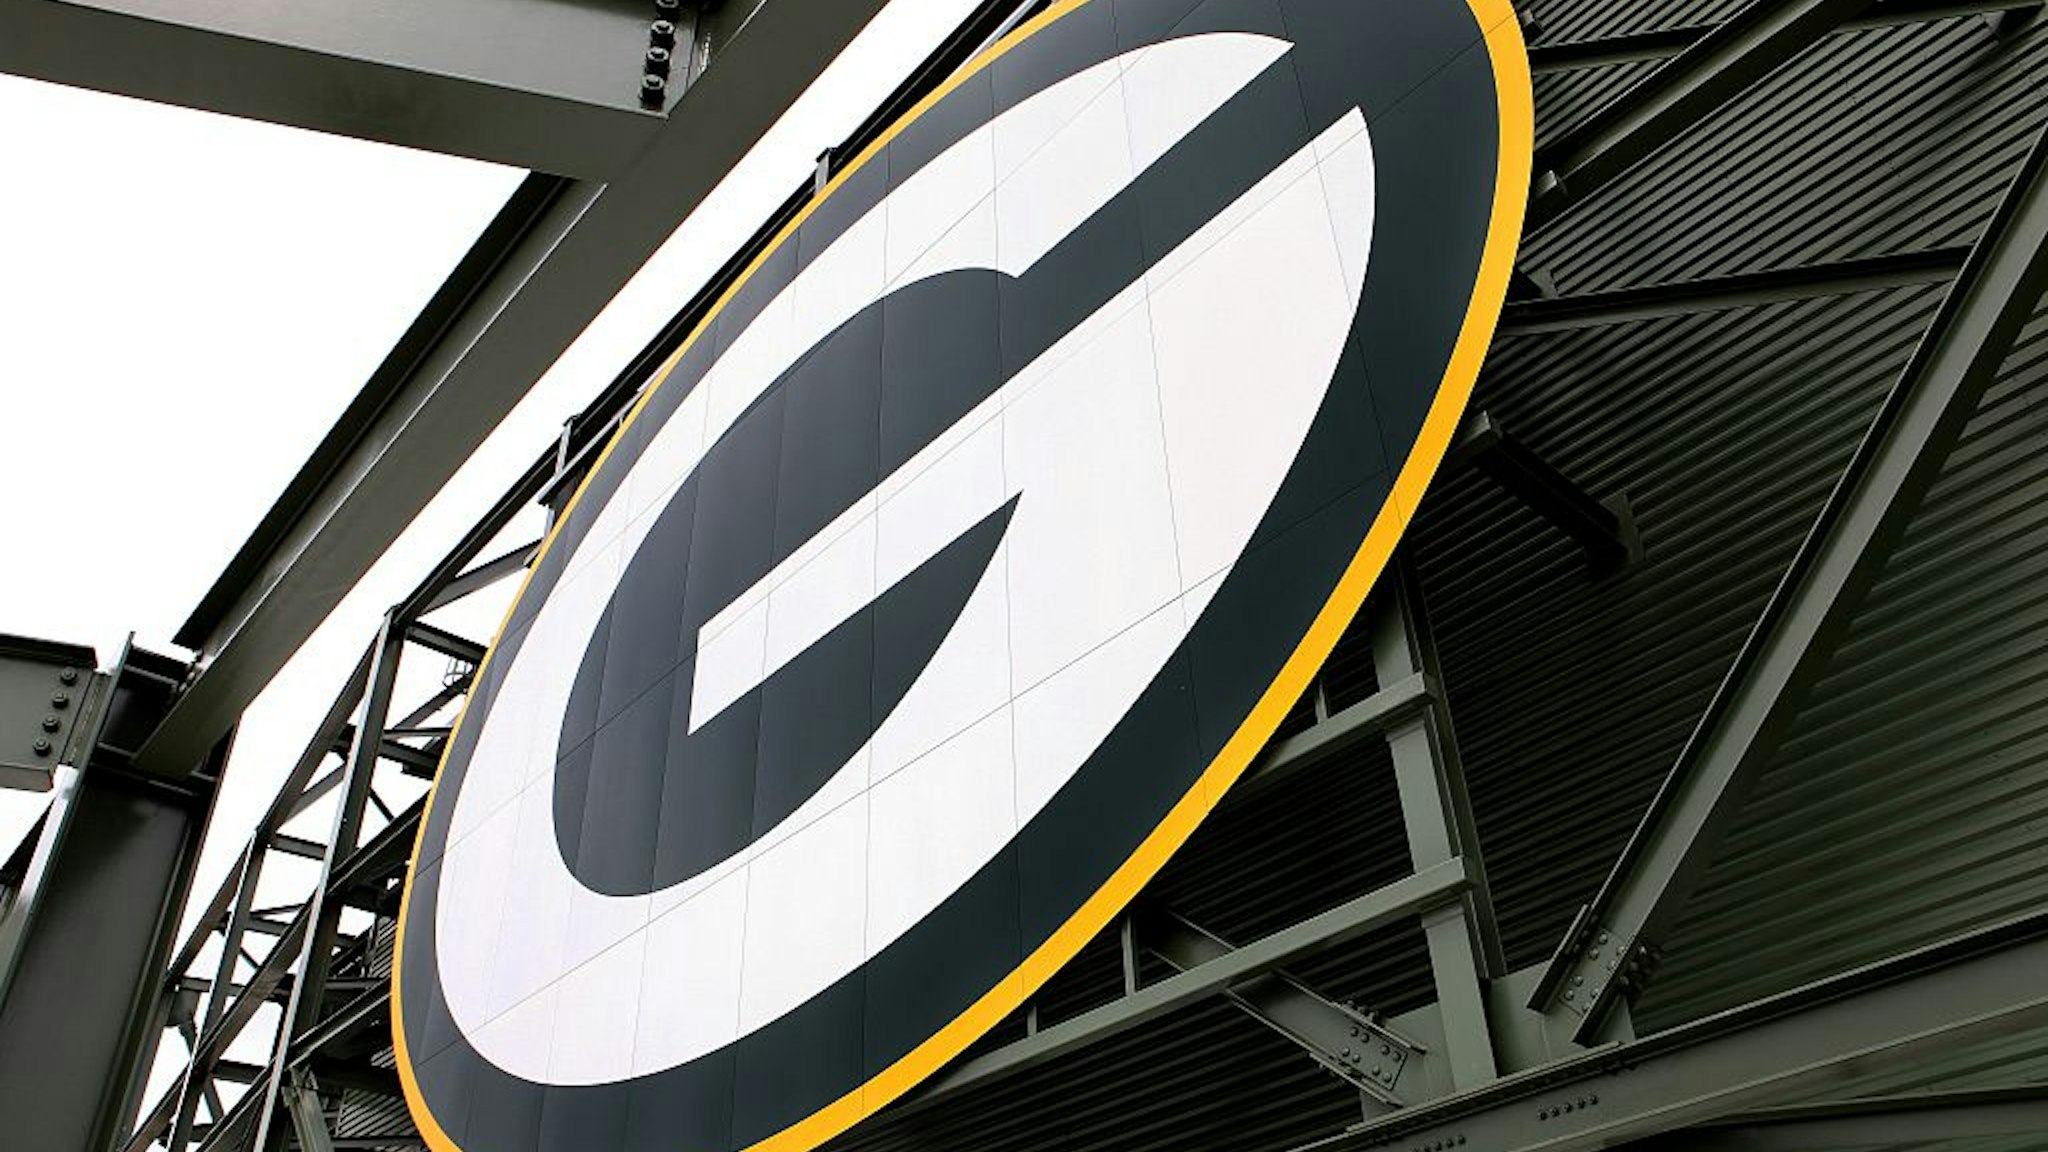 Green Bay Packers logo inside Lambeau Field, home of the Green Bay Packers football team on August 31, 2015 in Green Bay, Wisconsin.